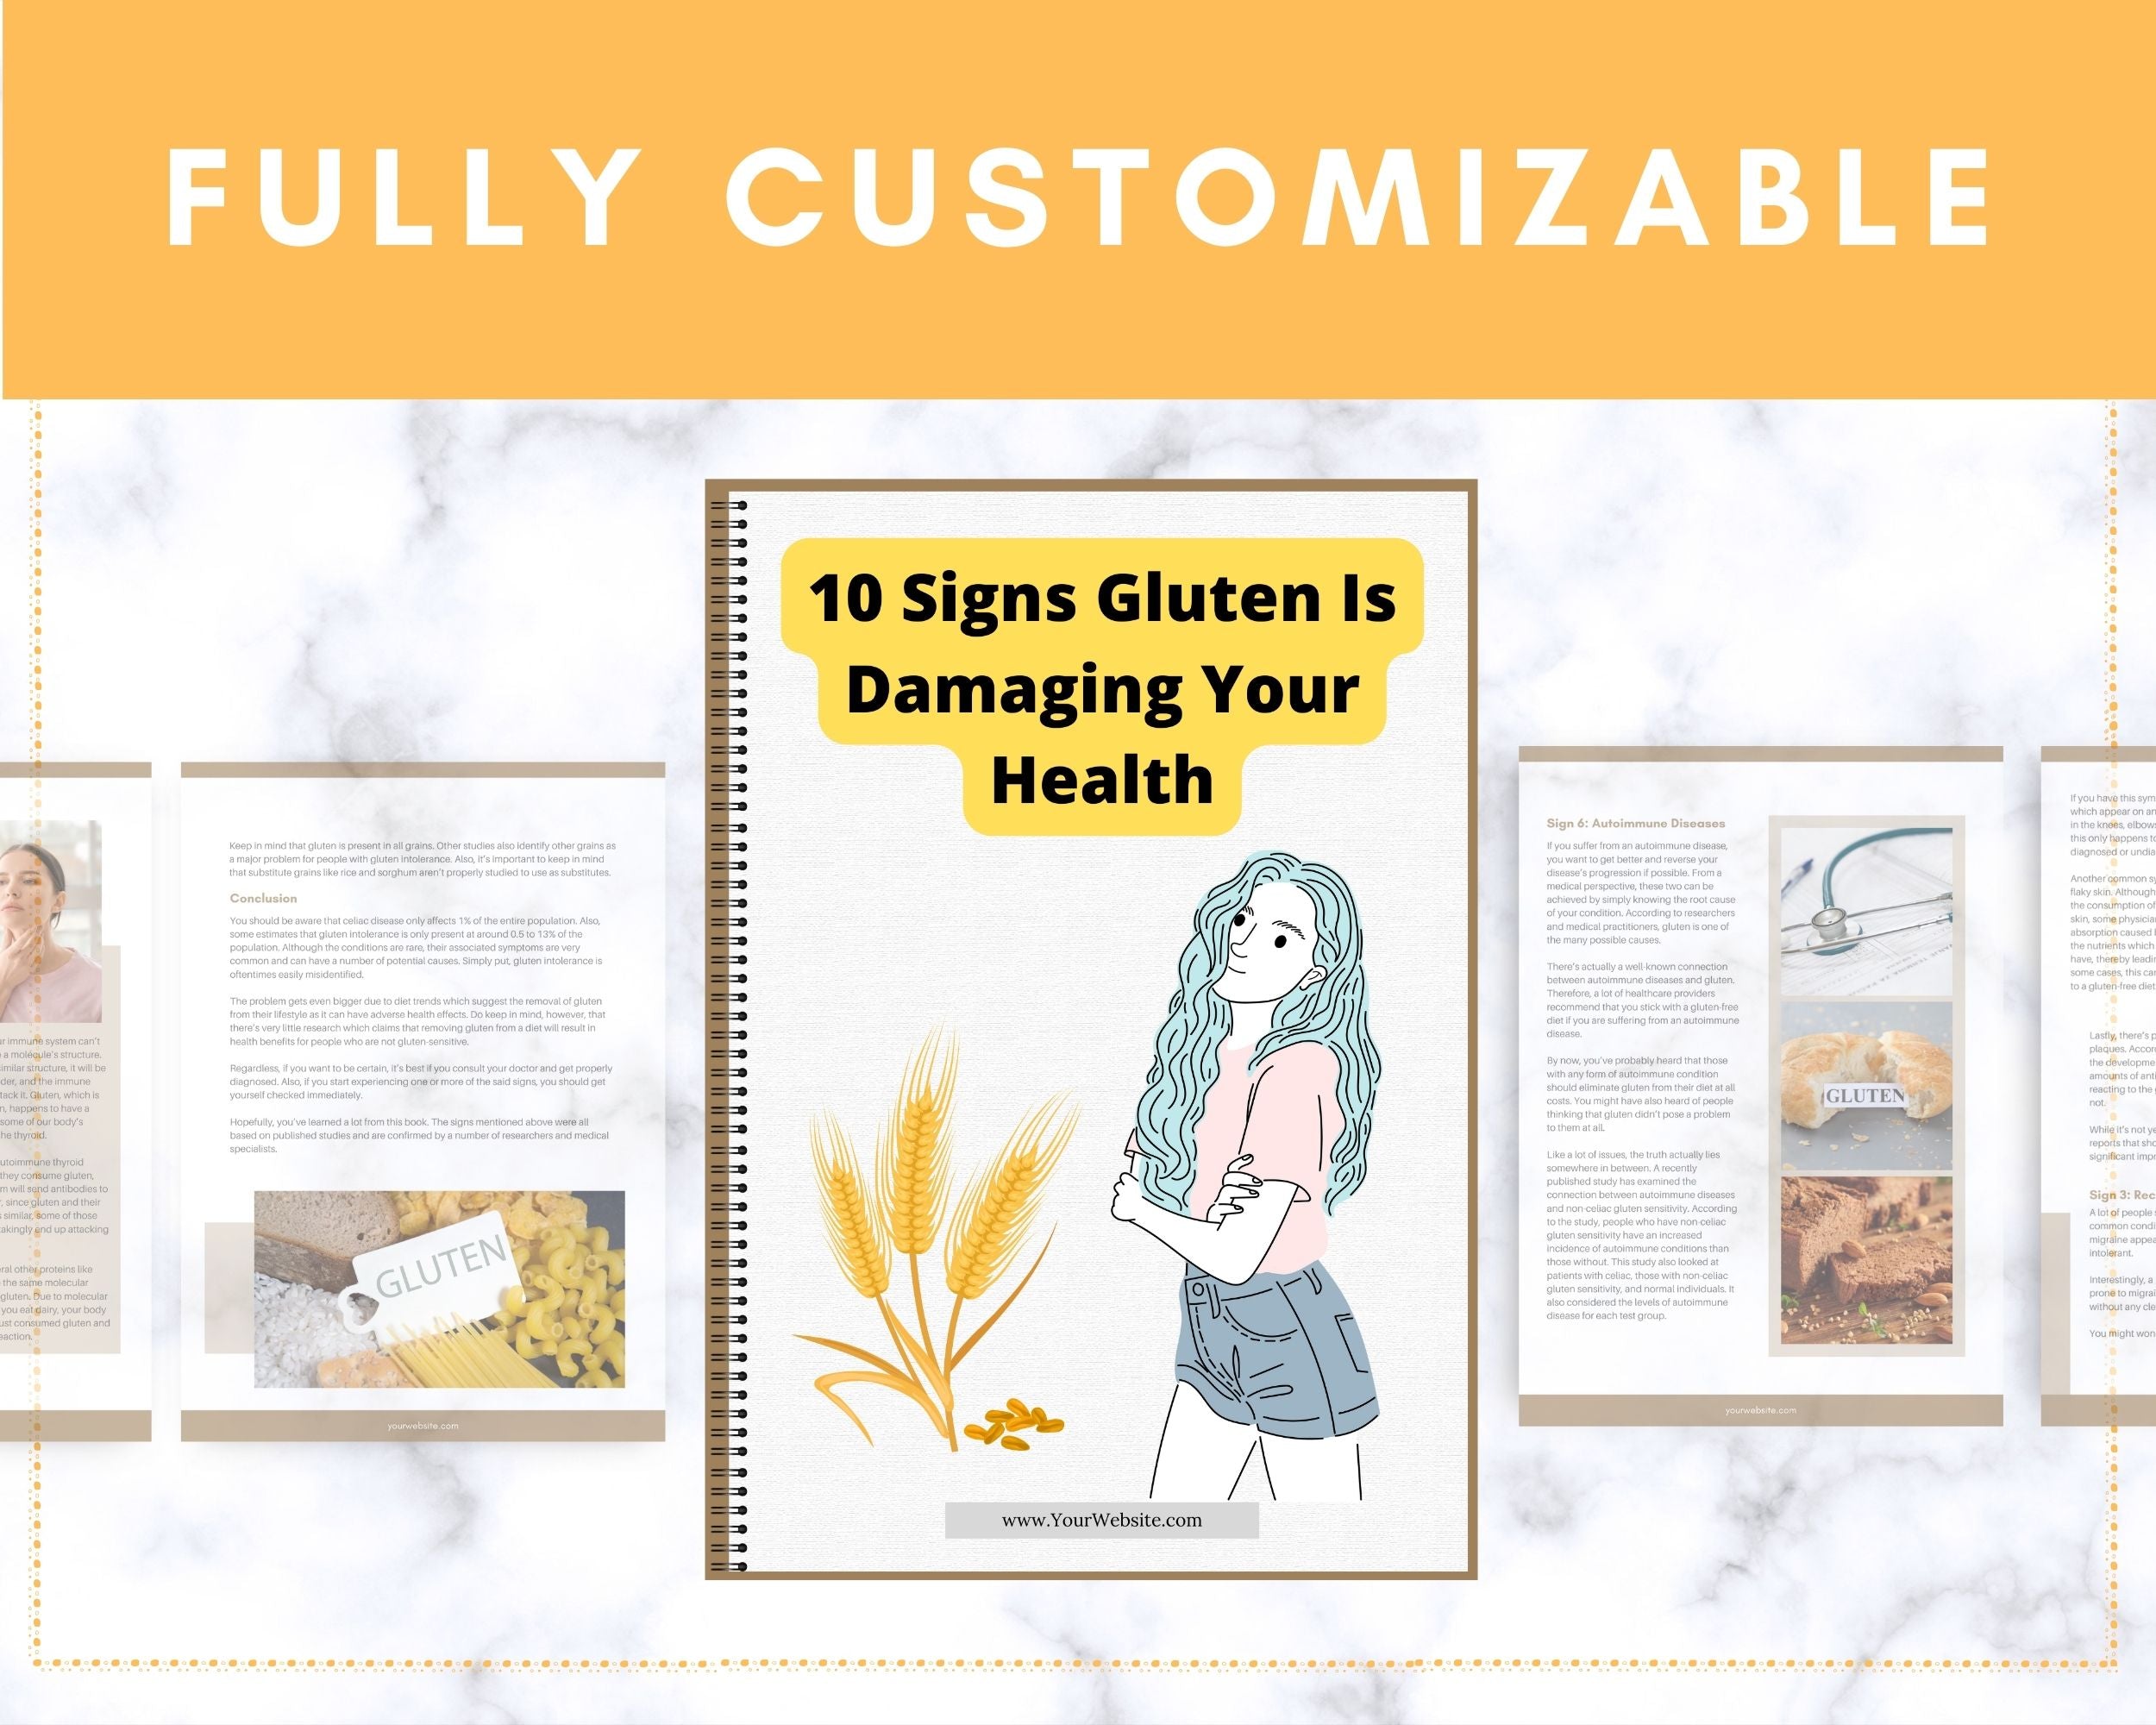 Editable 10 Signs Gluten Is Damaging Your Health Ebook | Done-for-You Ebook in Canva | Rebrandable and Resizable Canva Template